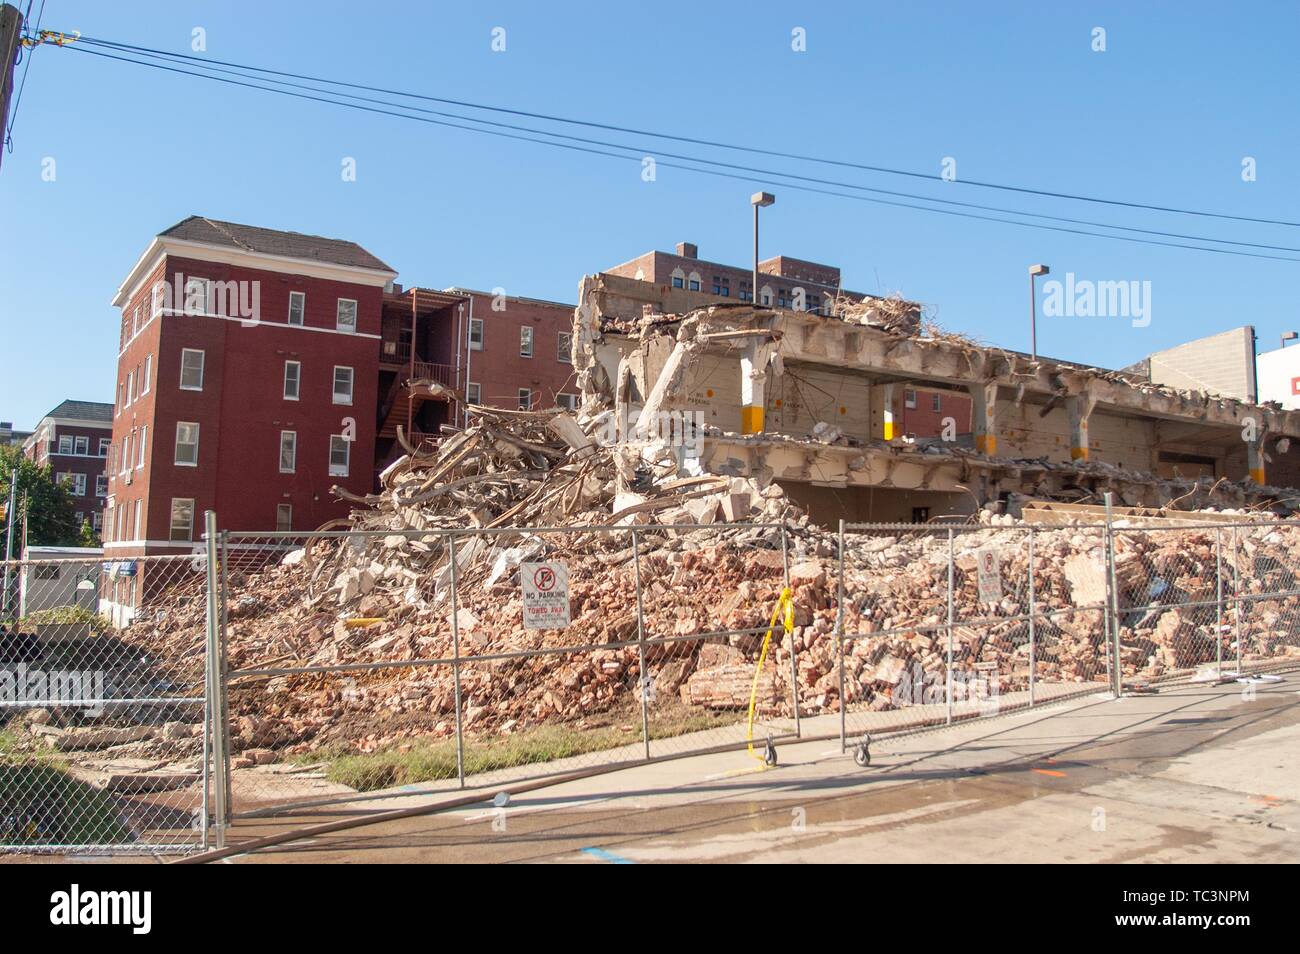 A fenced area containing demolition rubble, on a sunny day, on the Johns Hopkins University campus, Baltimore, Maryland, September 10, 2004. From the Homewood Photography Collection. () Stock Photo